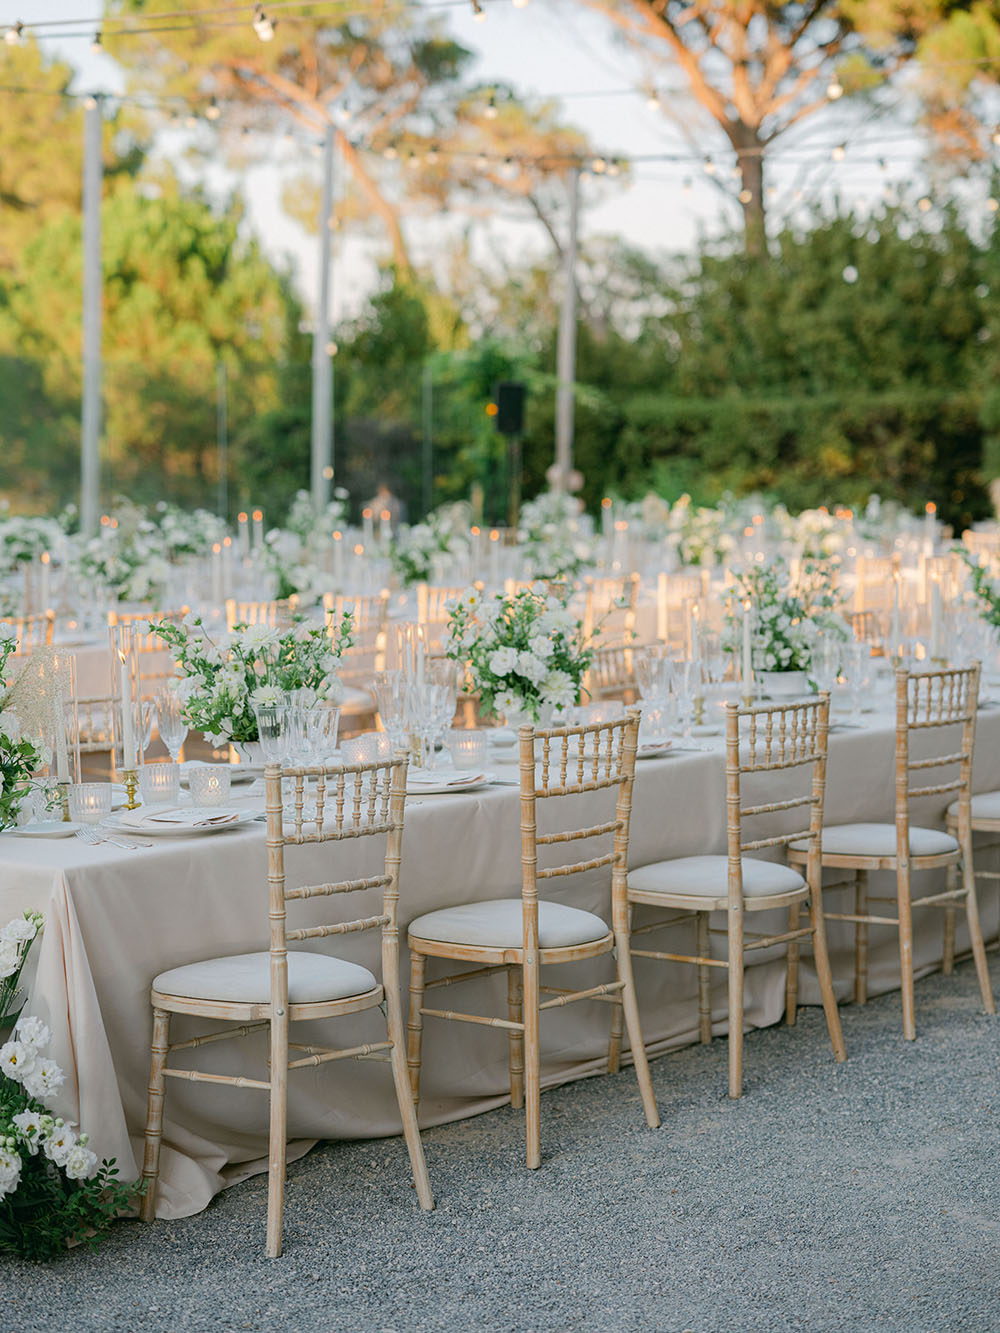 white and green wedding tablescape at Bastide du Roy